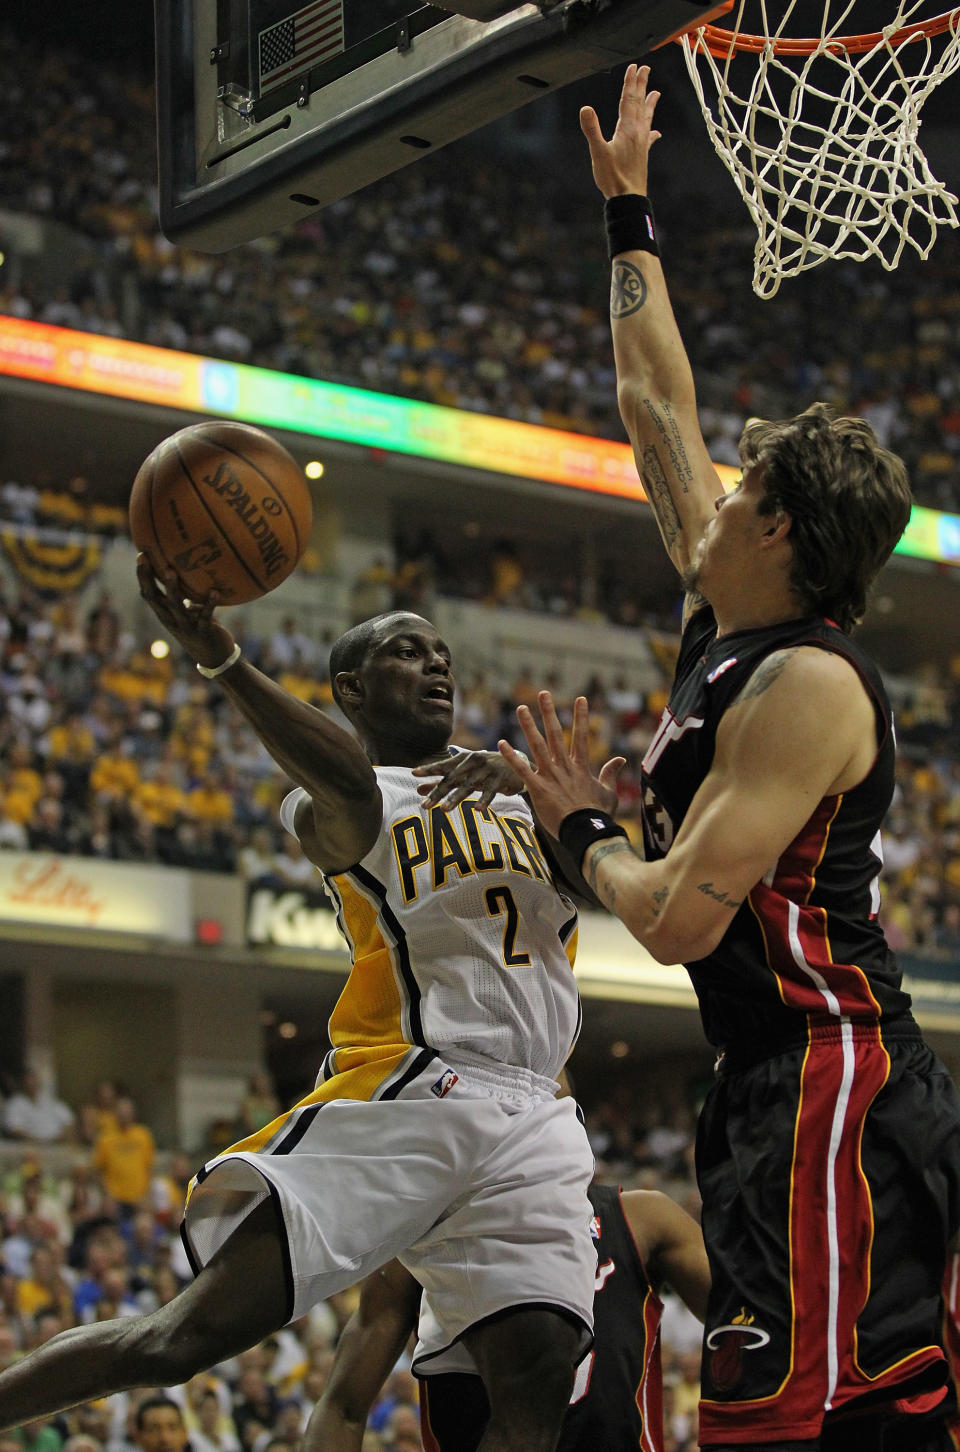 INDIANAPOLIS, IN - MAY 20: Darren Collison #2 of the Indiana Pacers leaps to pass around Mike Miller #13 of the Miami Heat in Game Four of the Eastern Conference Semifinals in the 2012 NBA Playoffs at Bankers Life Fieldhouse on May 20, 2012 in Indianapolis, Indiana. NOTE TO USER: User expressly acknowledges and agrees that, by downloading and/or using this photograph, User is consenting to the terms and conditions of the Getty Images License Agreement. (Photo by Jonathan Daniel/Getty Images)